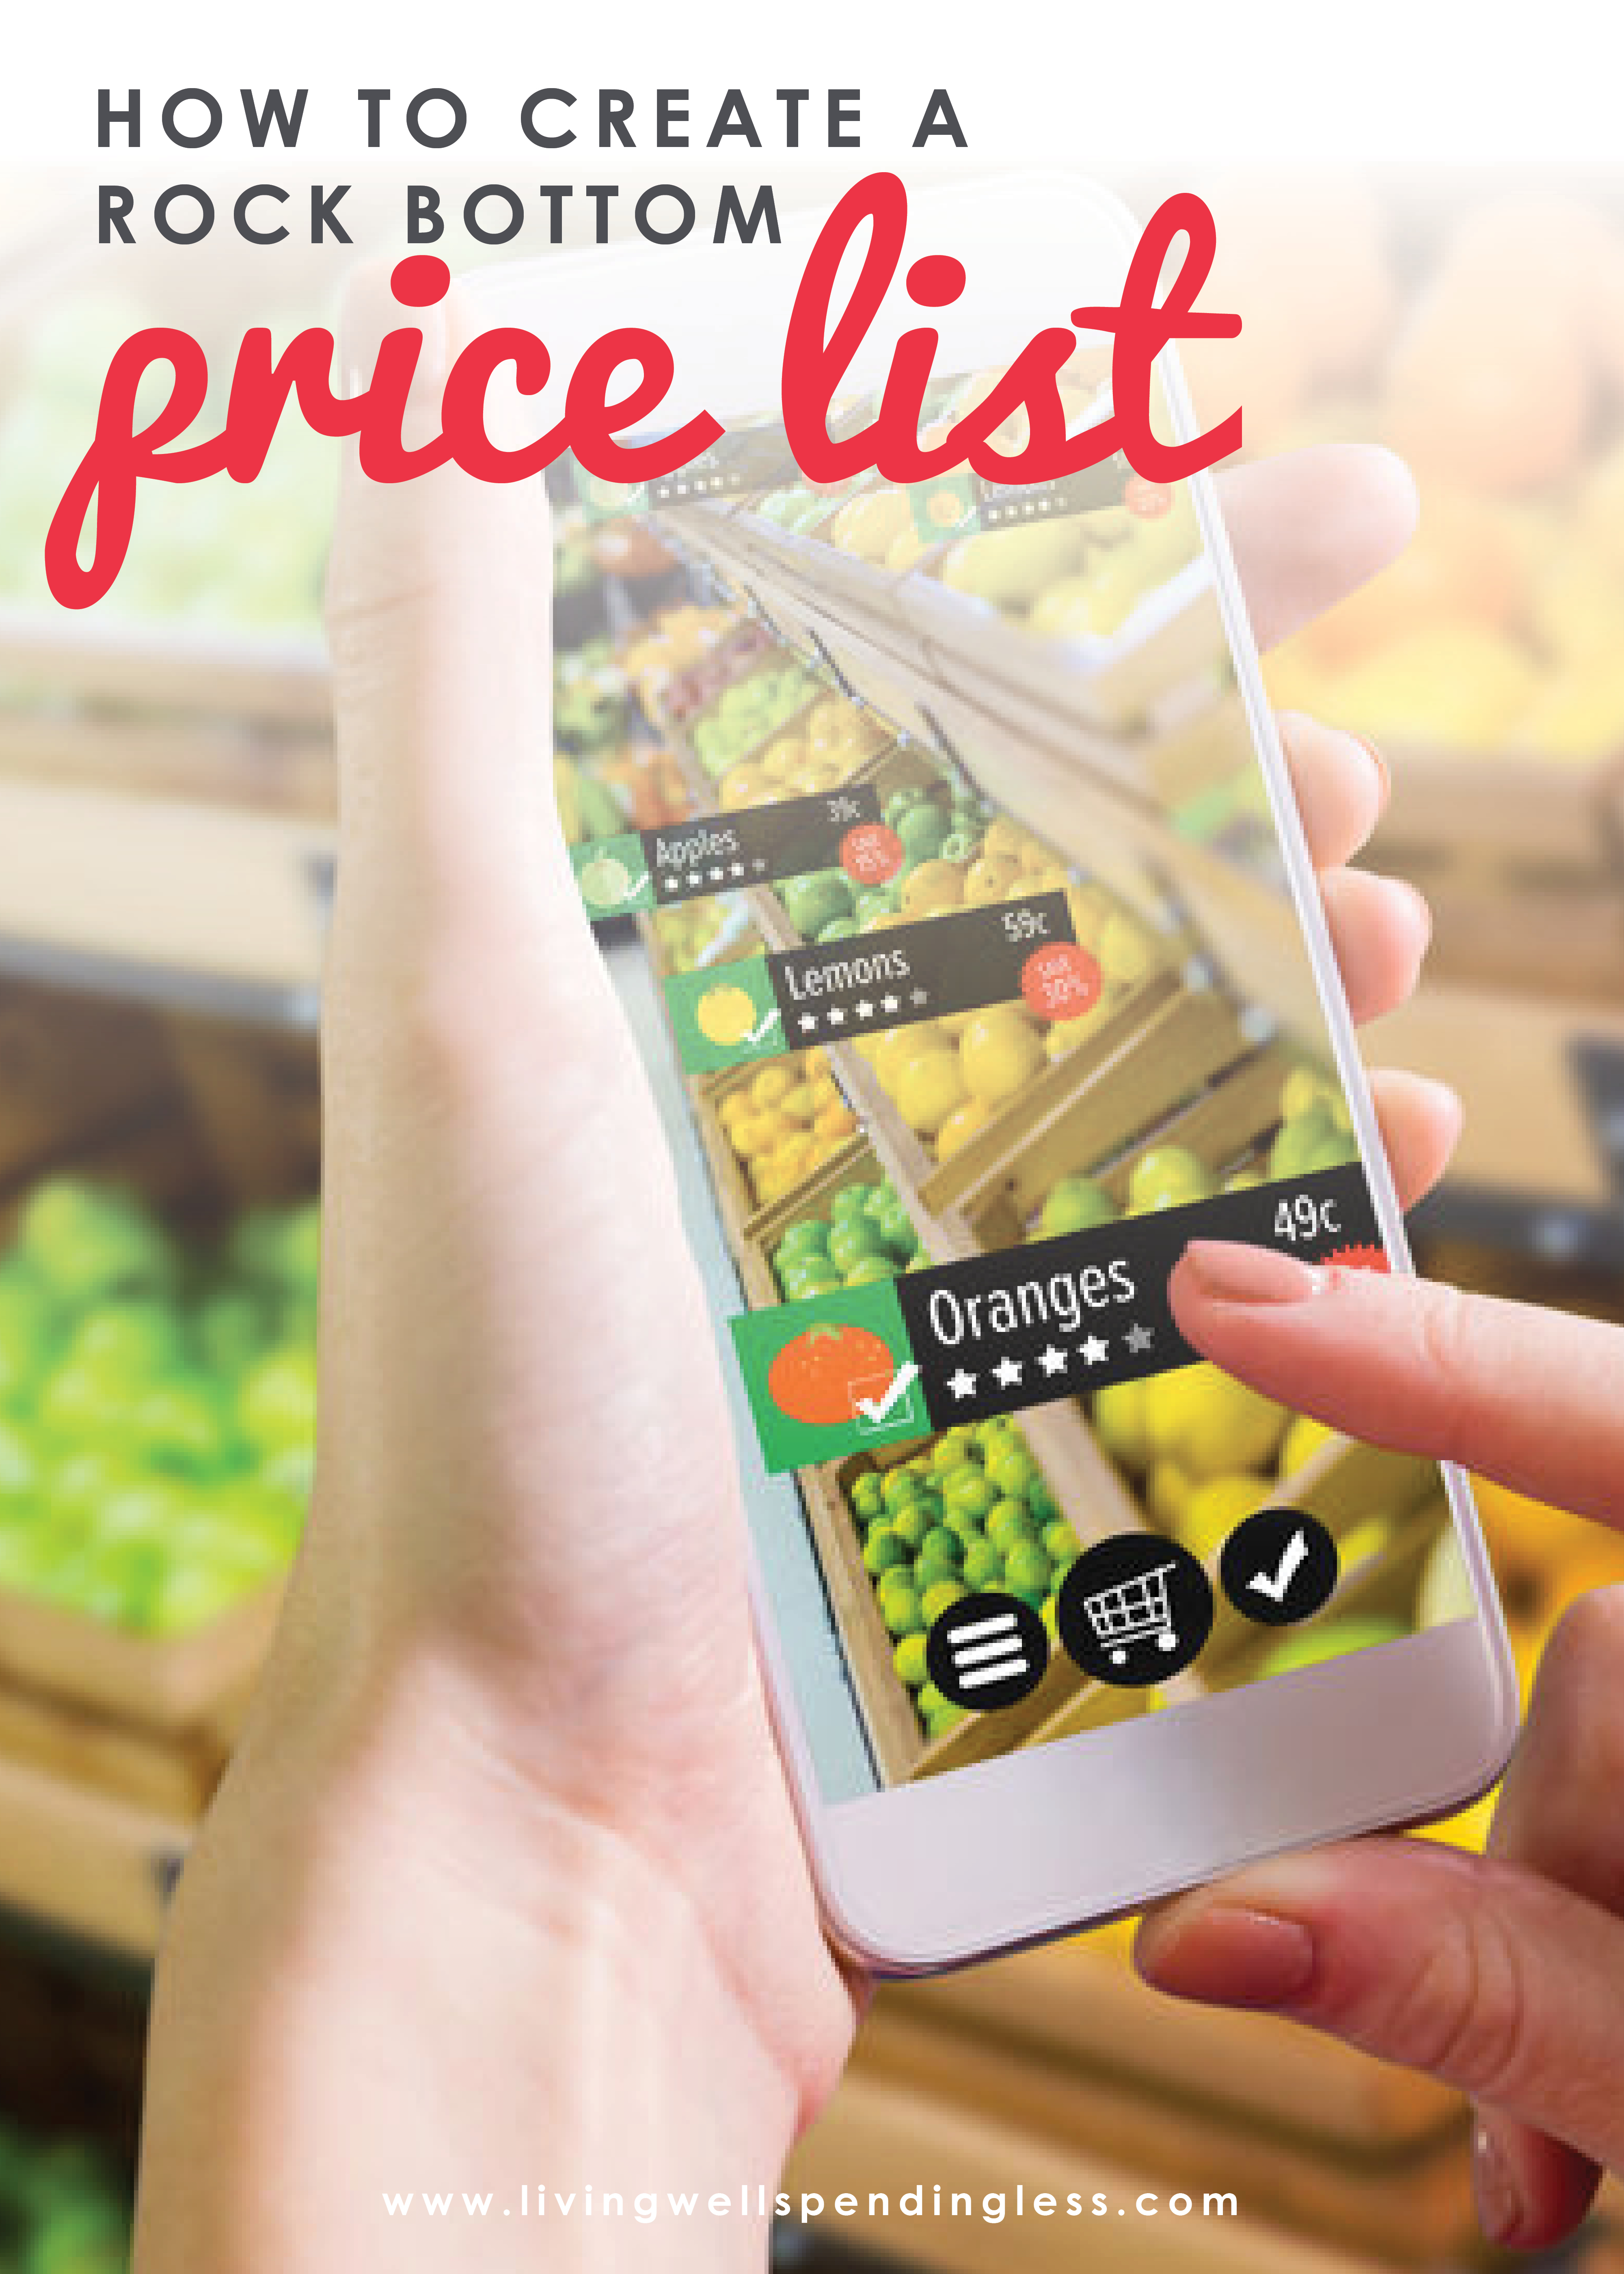 Want to save more money on groceries? Surprisingly, the biggest key to success is not using coupons, but knowing exactly when to stock up so that you only ever buy things at their lowest possible price. Don't miss this helpful post for 5 simple steps to creating a rock bottom price list of your very own. 